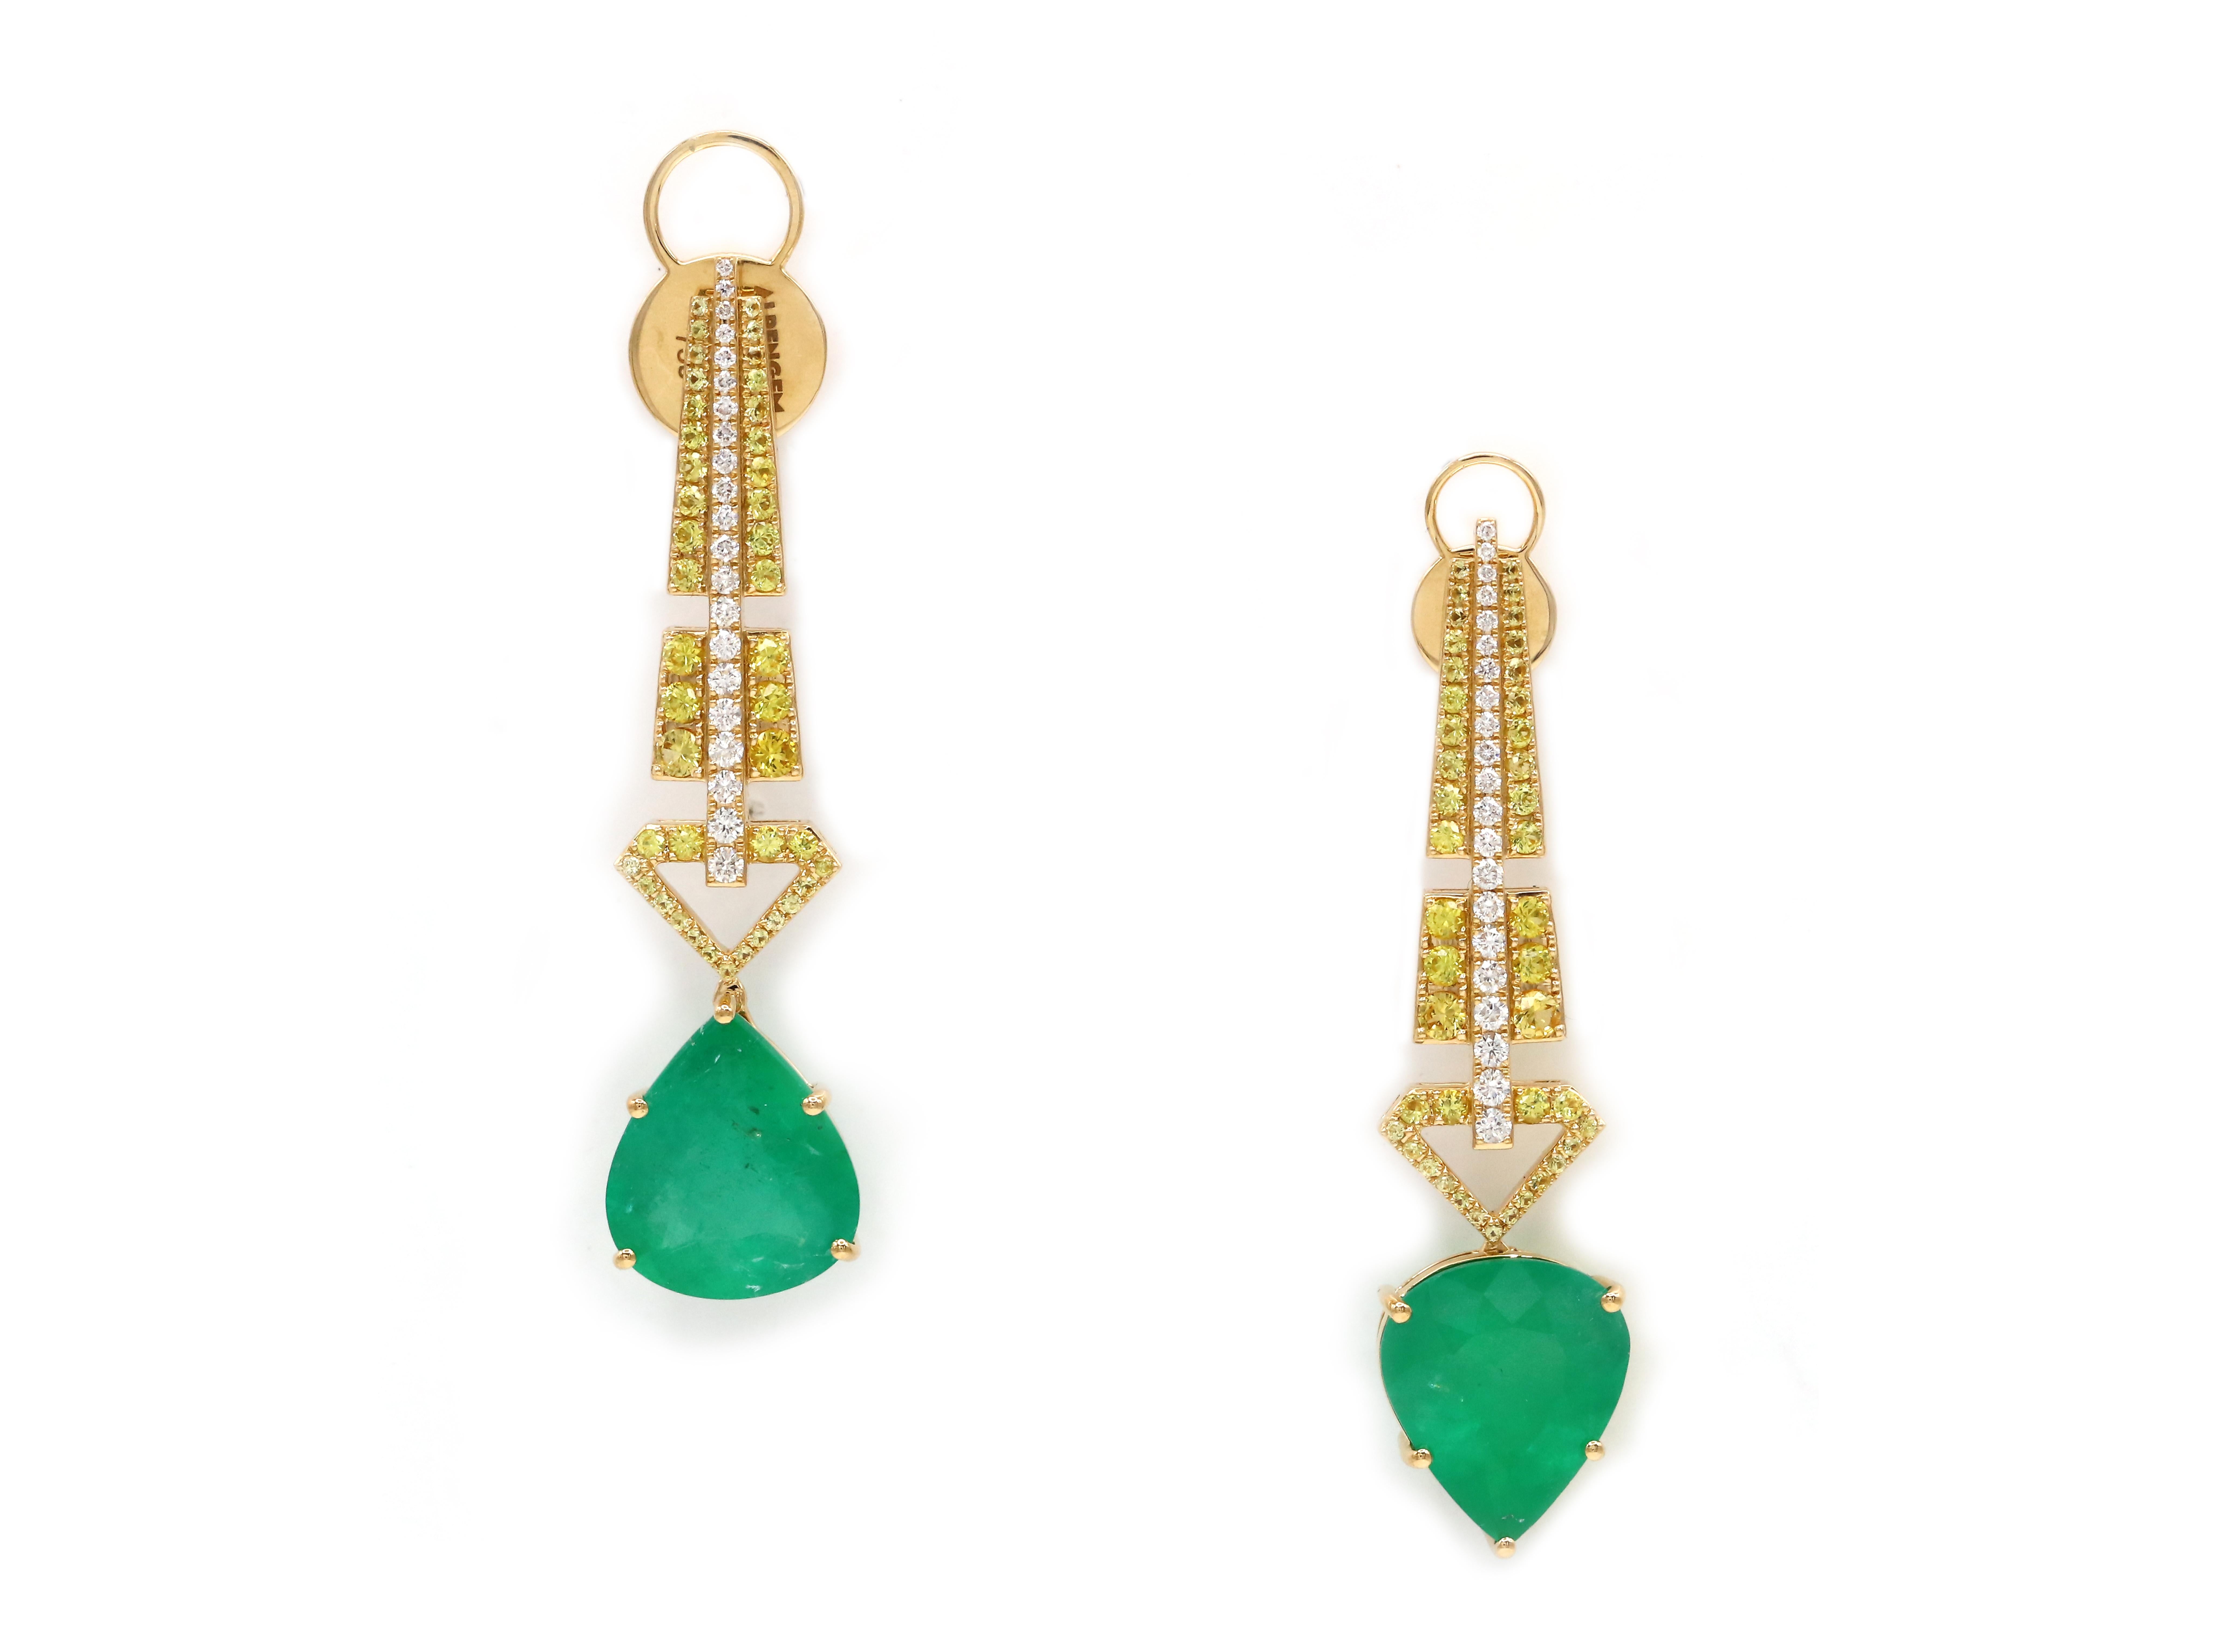 Earrings

18K Yellow Gold 

Weight 11,5 GMS

Emerald-2/11.89 Cts

Round Diamond-42/0.438 Cts

Yellow Sapphire-86/1.56 Cts

Indulge in the allure of our 